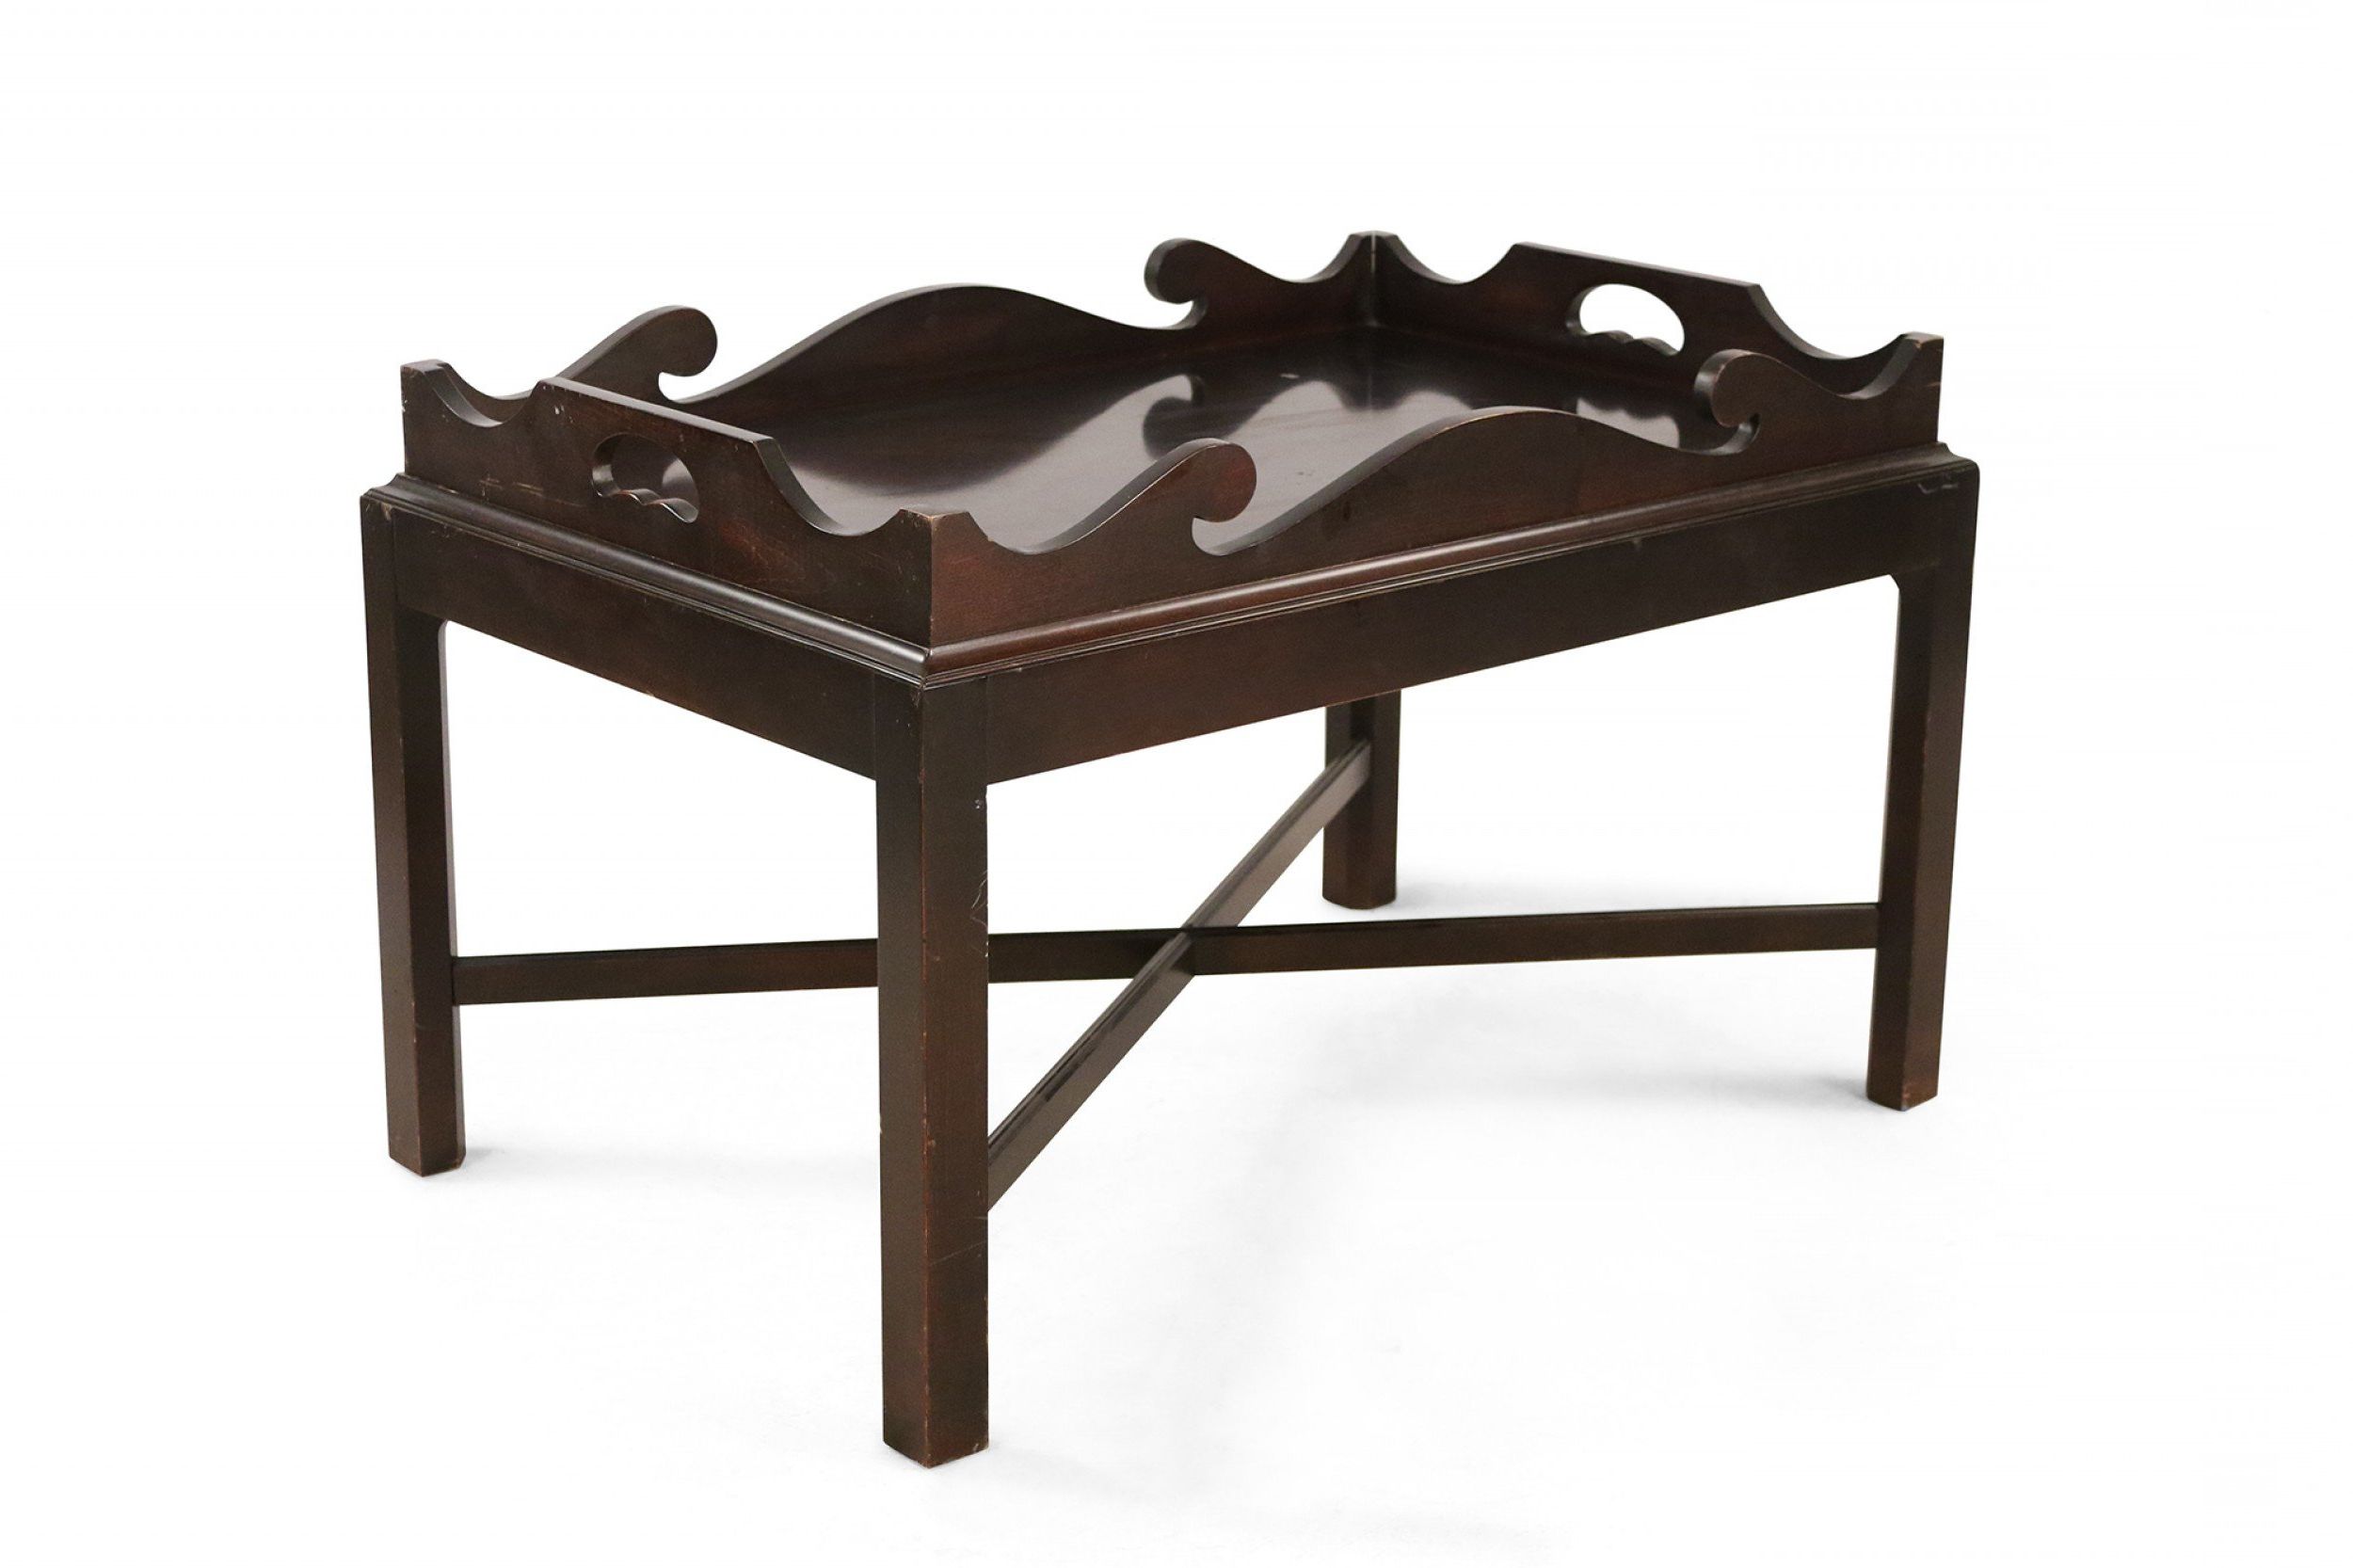 Contemporary Dark Wood Removable Tray Top Coffee Table Inside Most Recent Detachable Tray Coffee Tables (View 8 of 15)